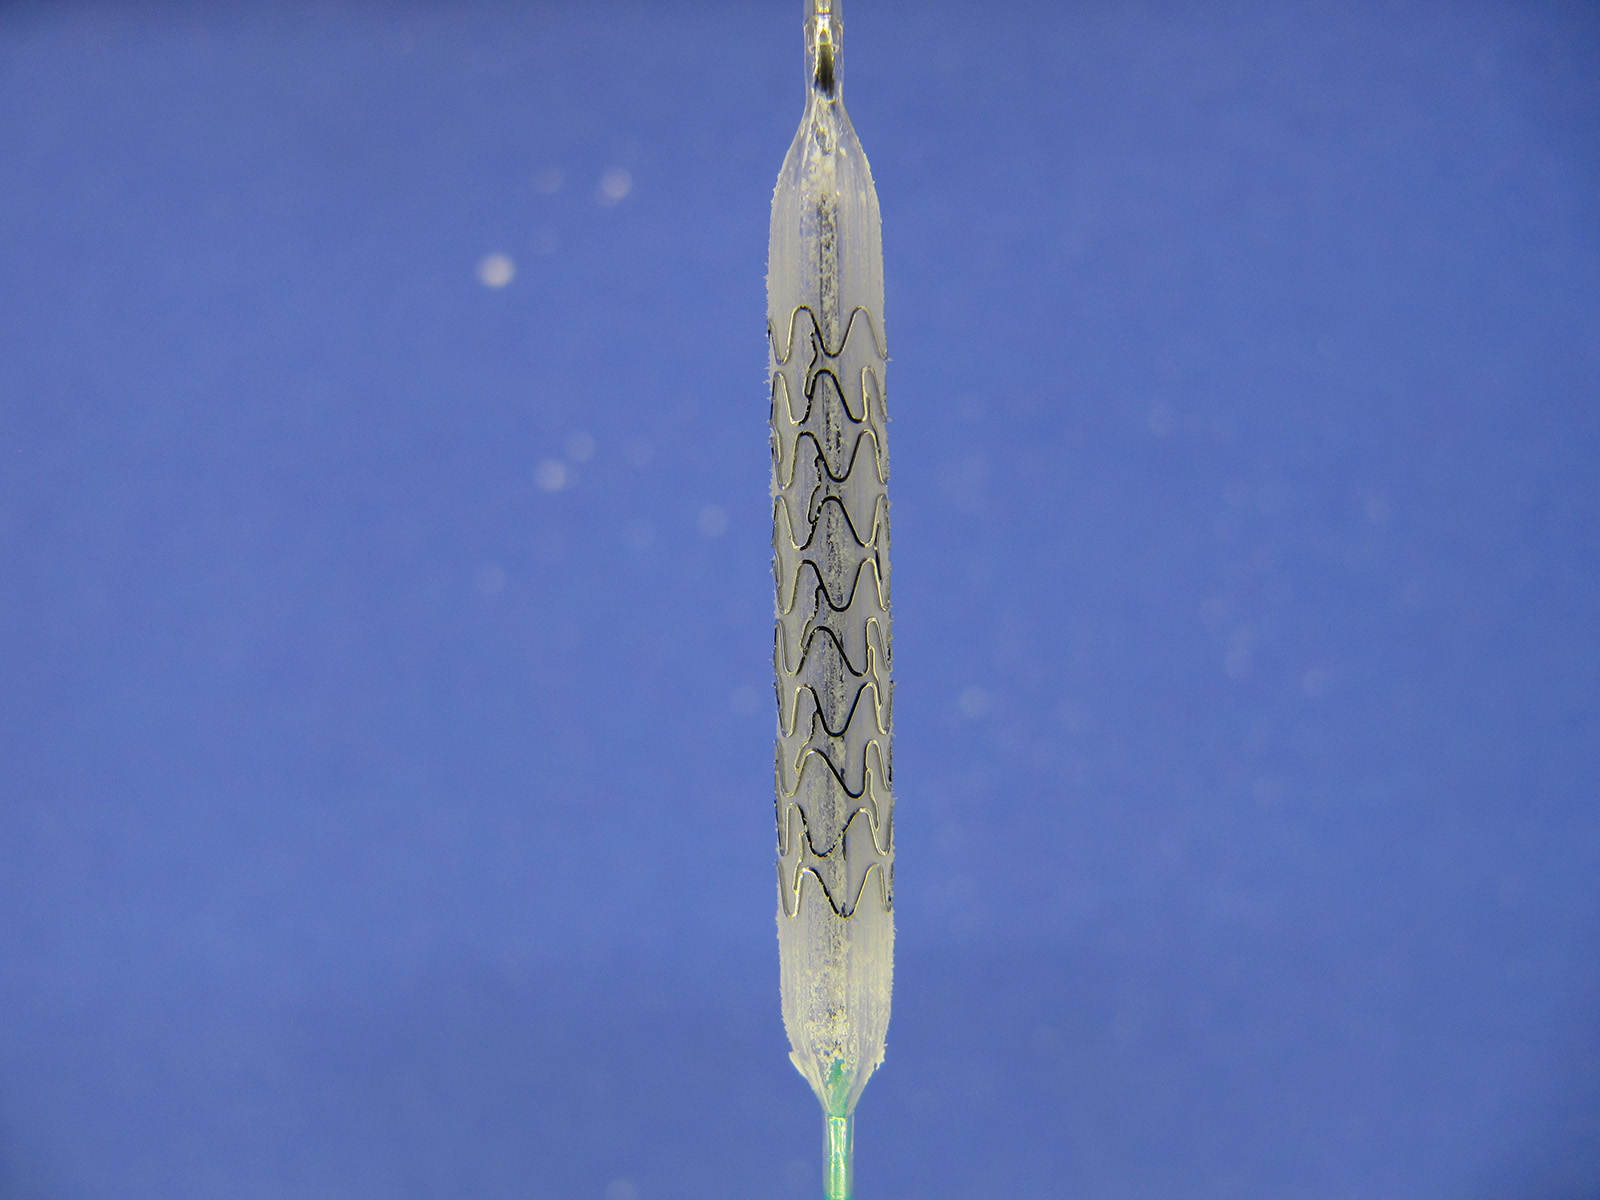  A stent on a drug-coated balloon catheter   